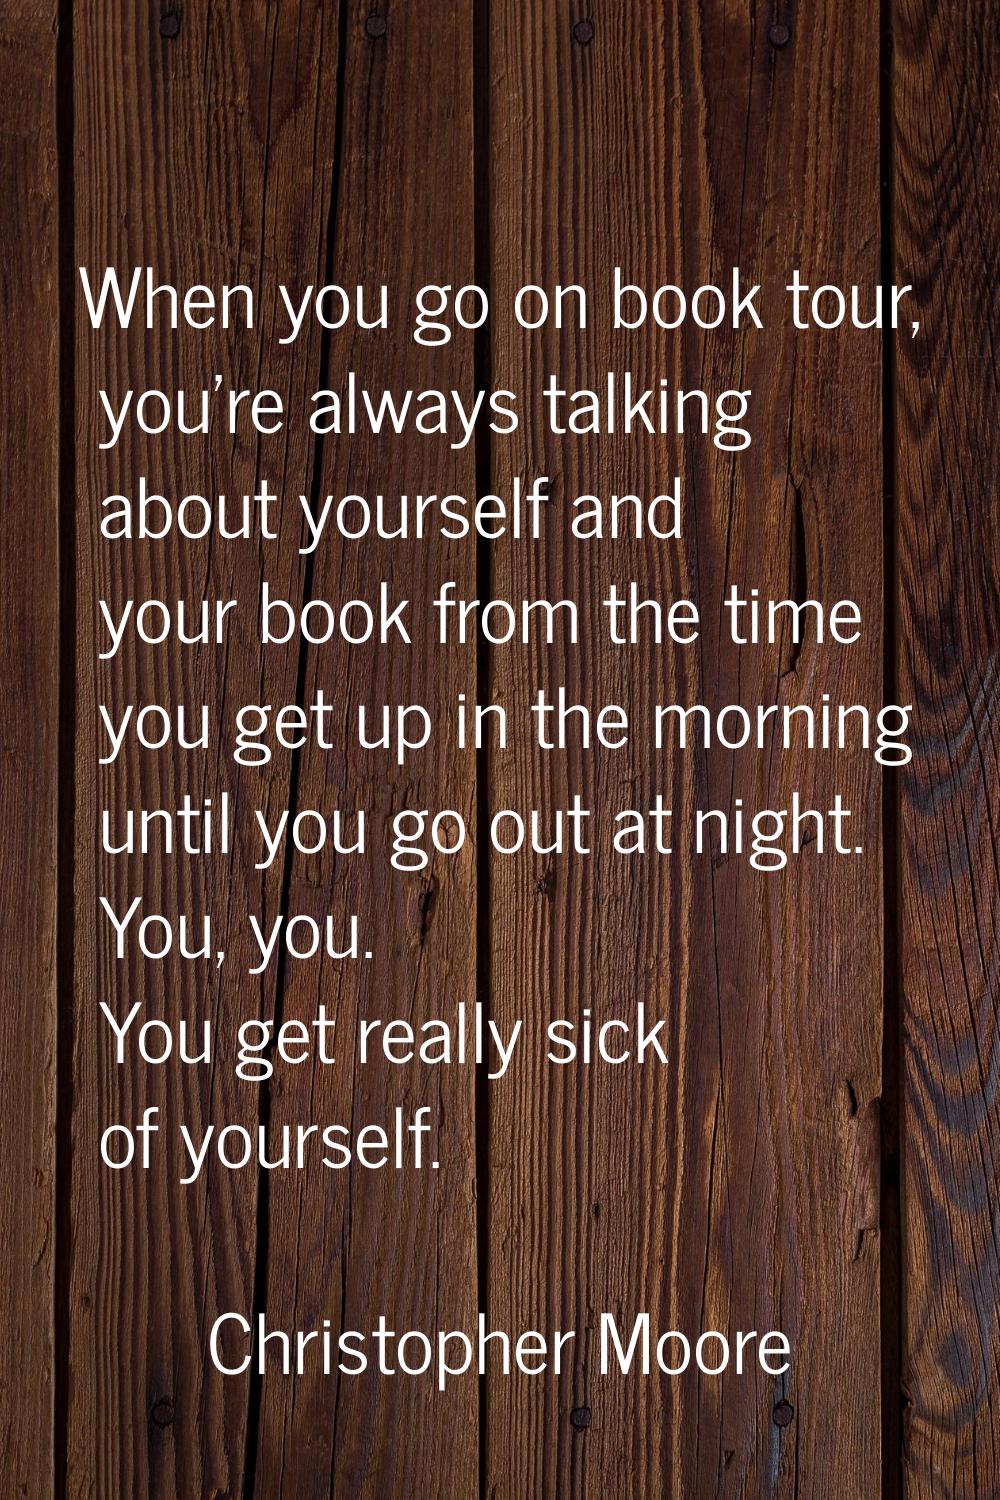 When you go on book tour, you're always talking about yourself and your book from the time you get 